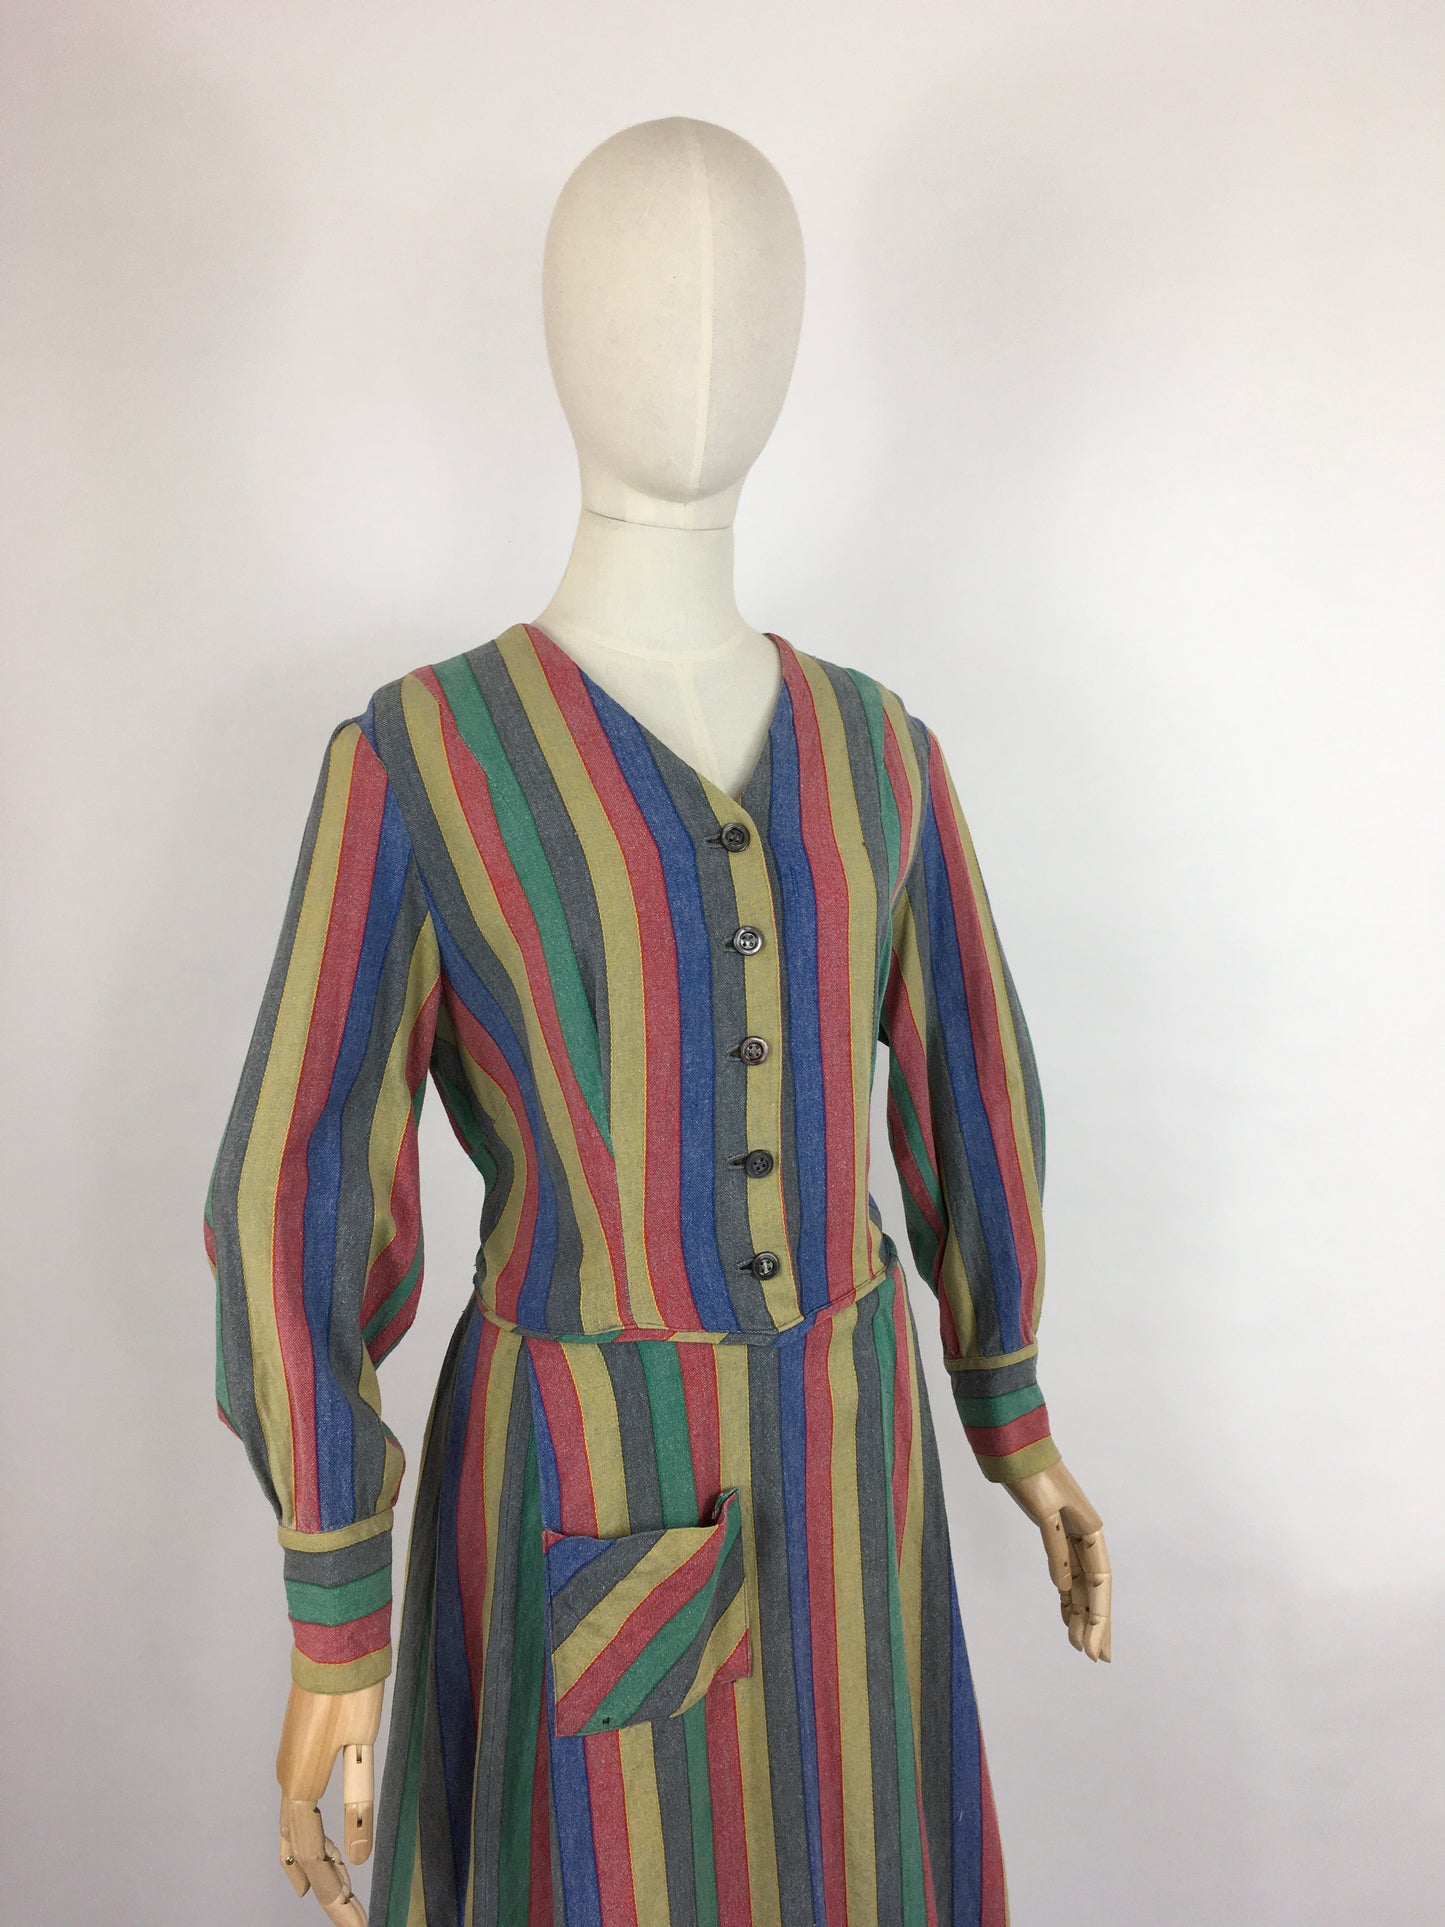 Original Late 1930s Day Dress - In a Fabulous Heavyweight Linen in a Rainbow Stripe with Contrast Chevron Pattern